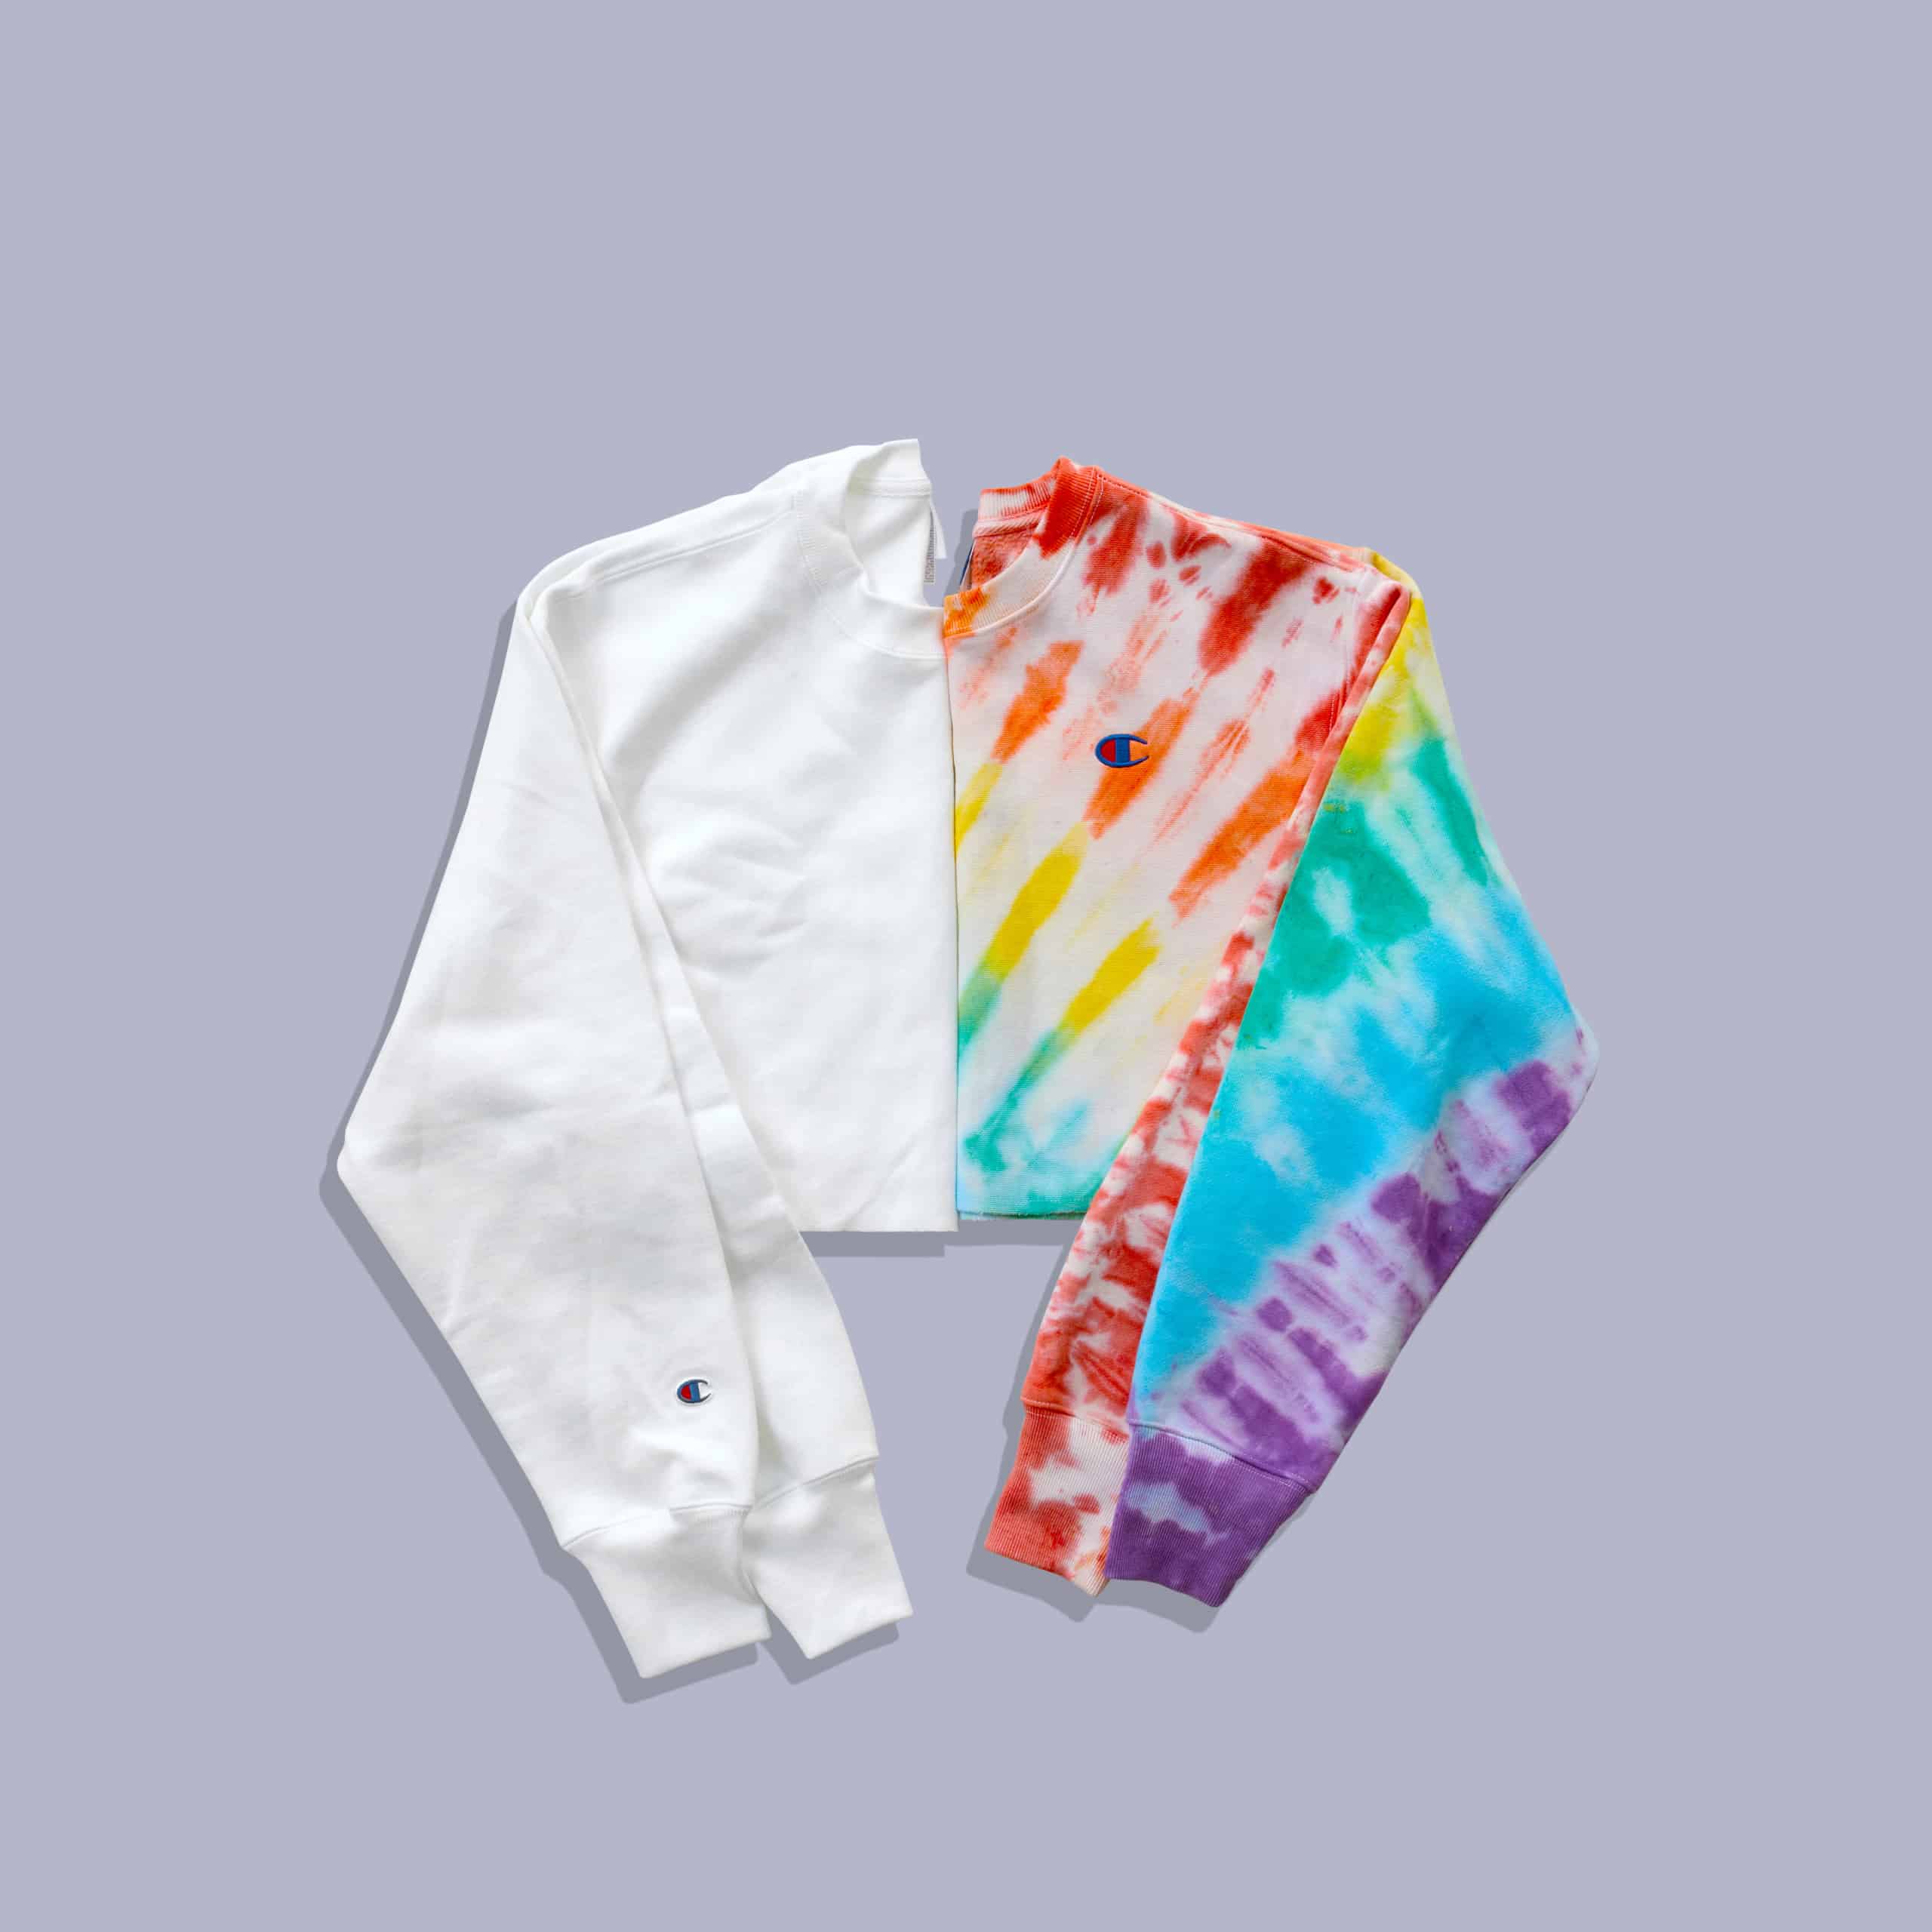 How to use Rit dye to Tie Dye 